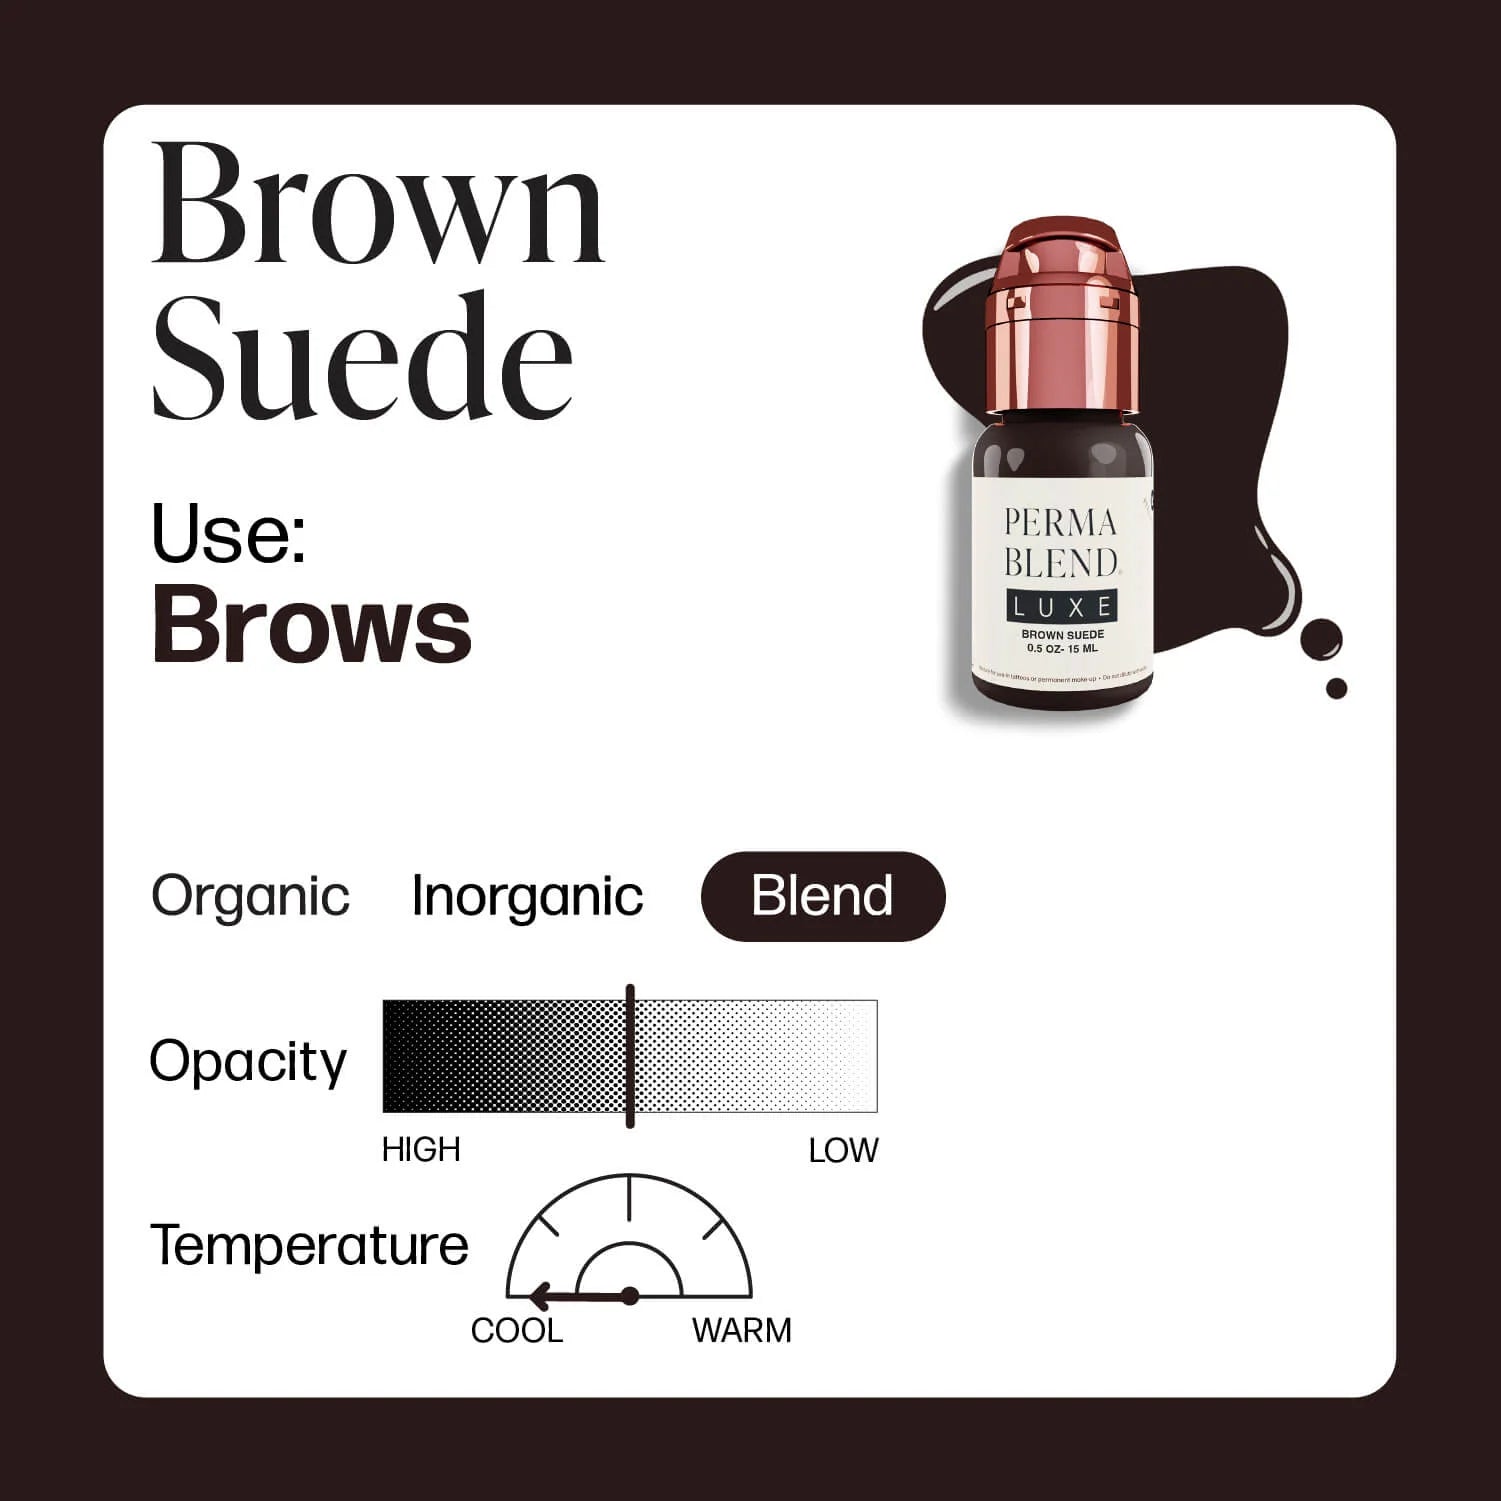 Perma Blend Luxe - Brown Suede